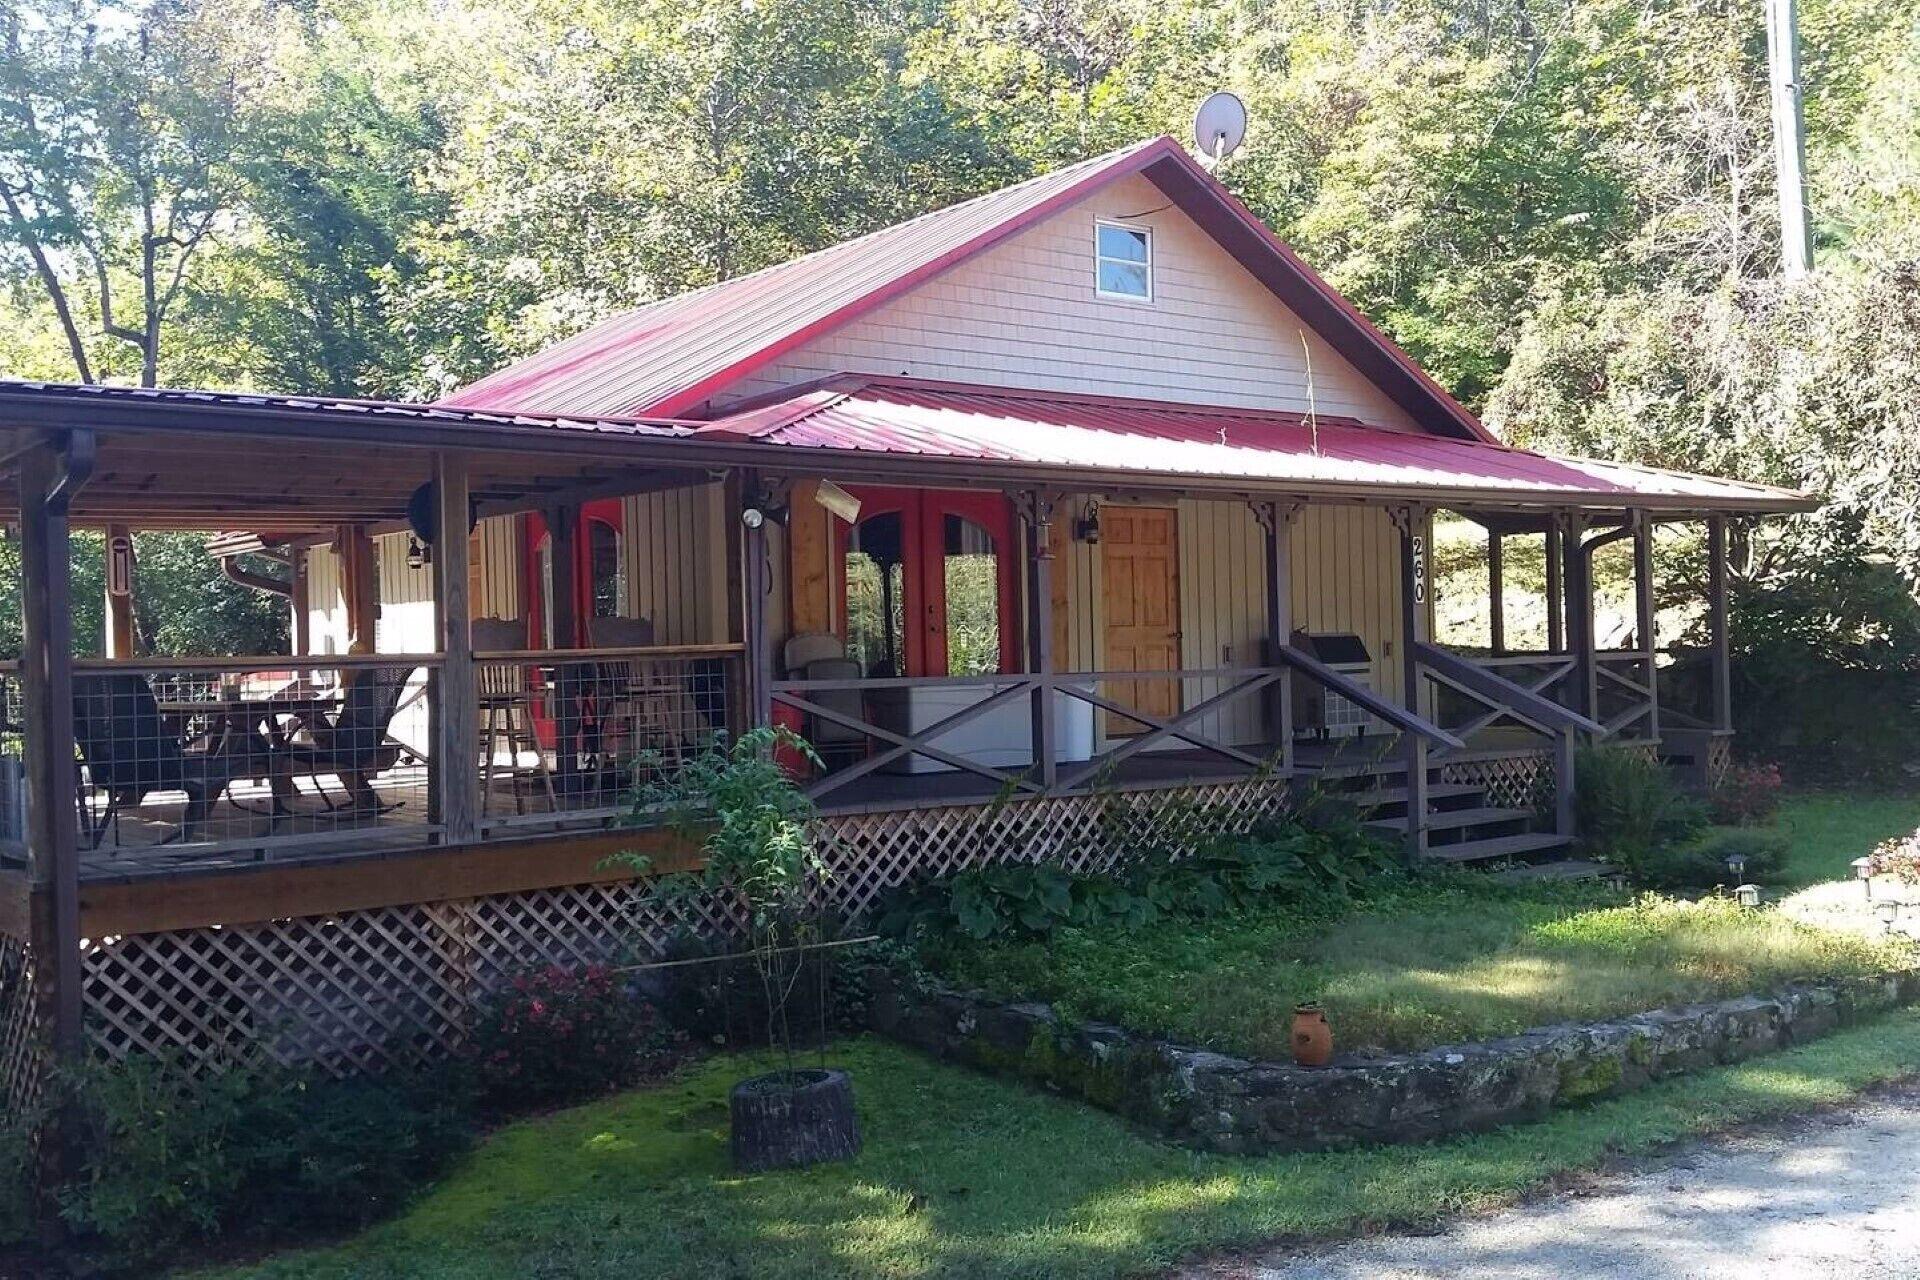 Pet Friendly Henry's Red Roof Cabin